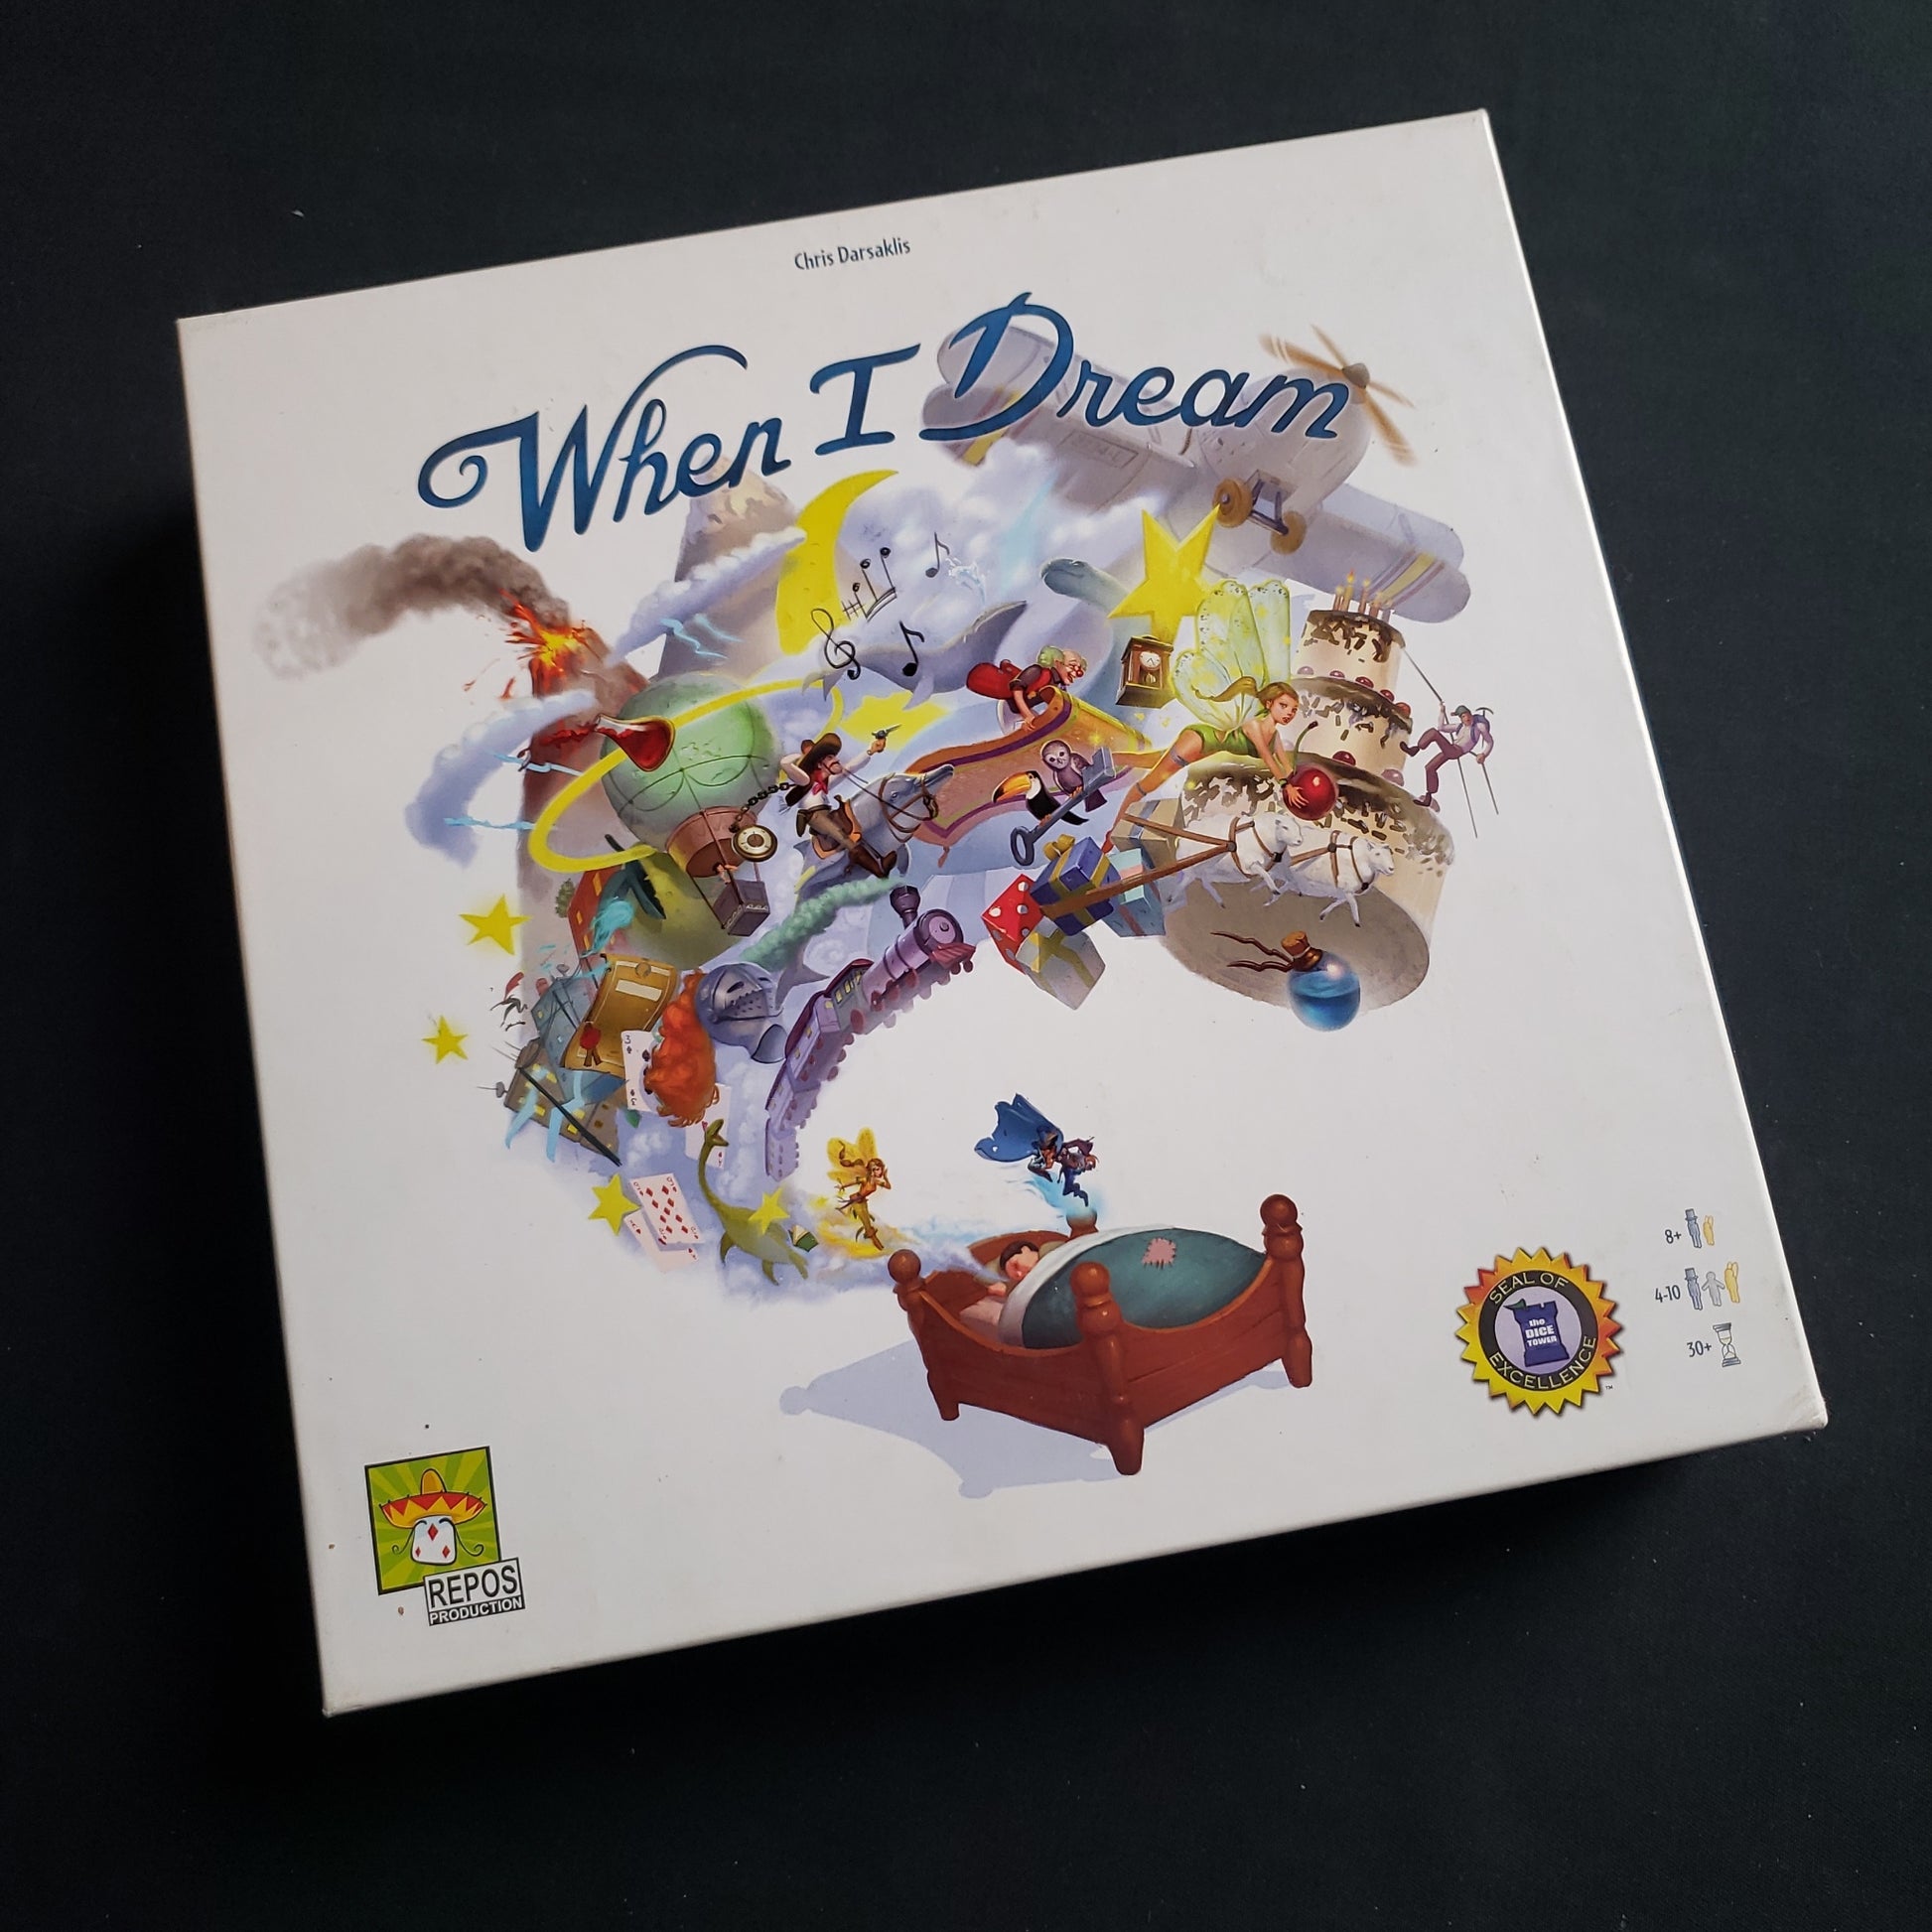 Image shows the front cover of the box of the When I Dream board game